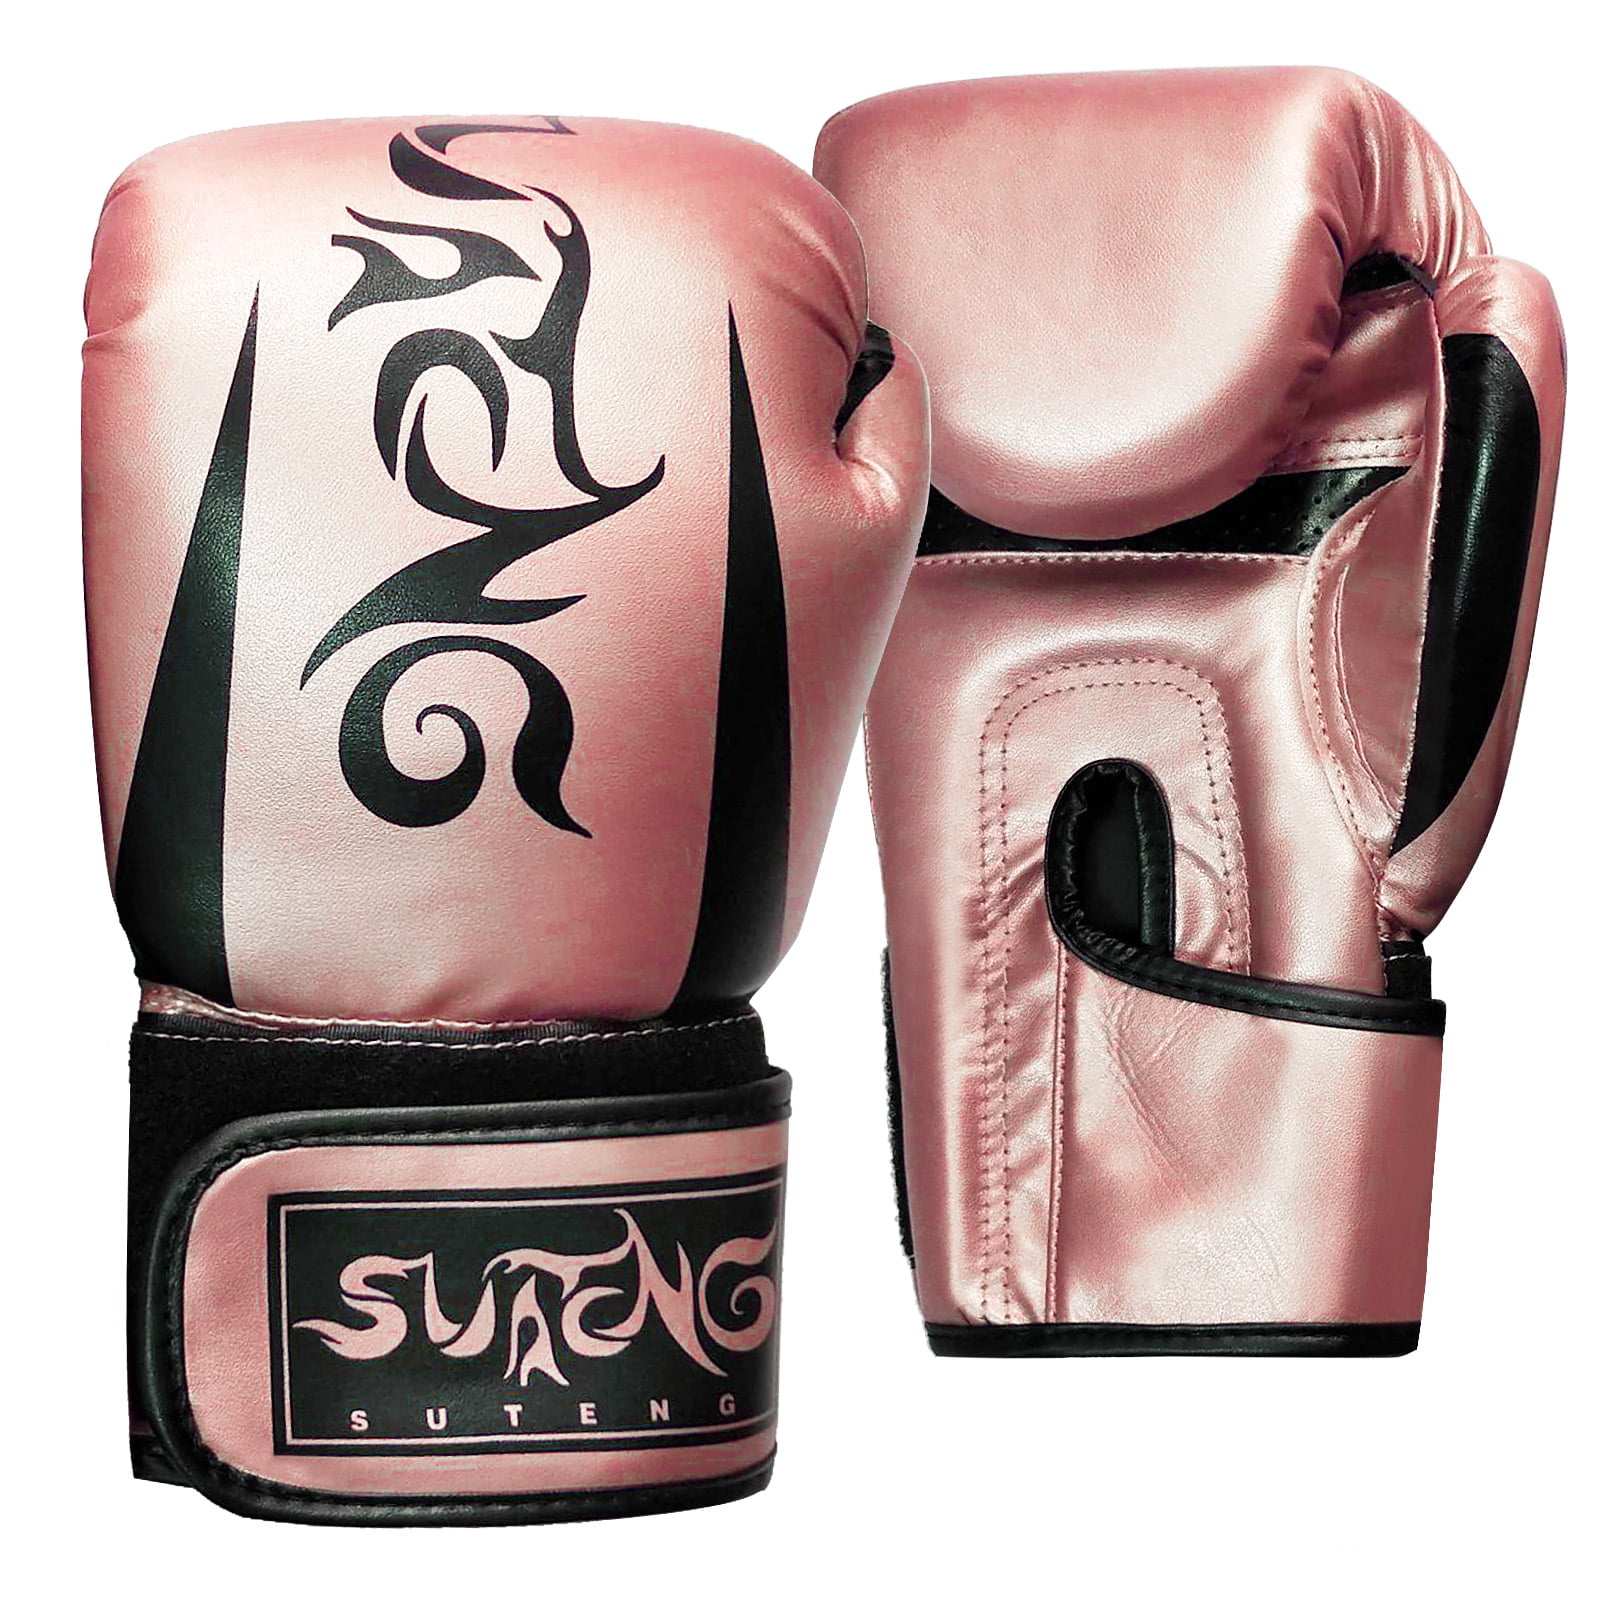 Boom Pro Ladies Boxing Gloves Curved Focus Pads Hook & Jab Mitts Kick Punch Bag 